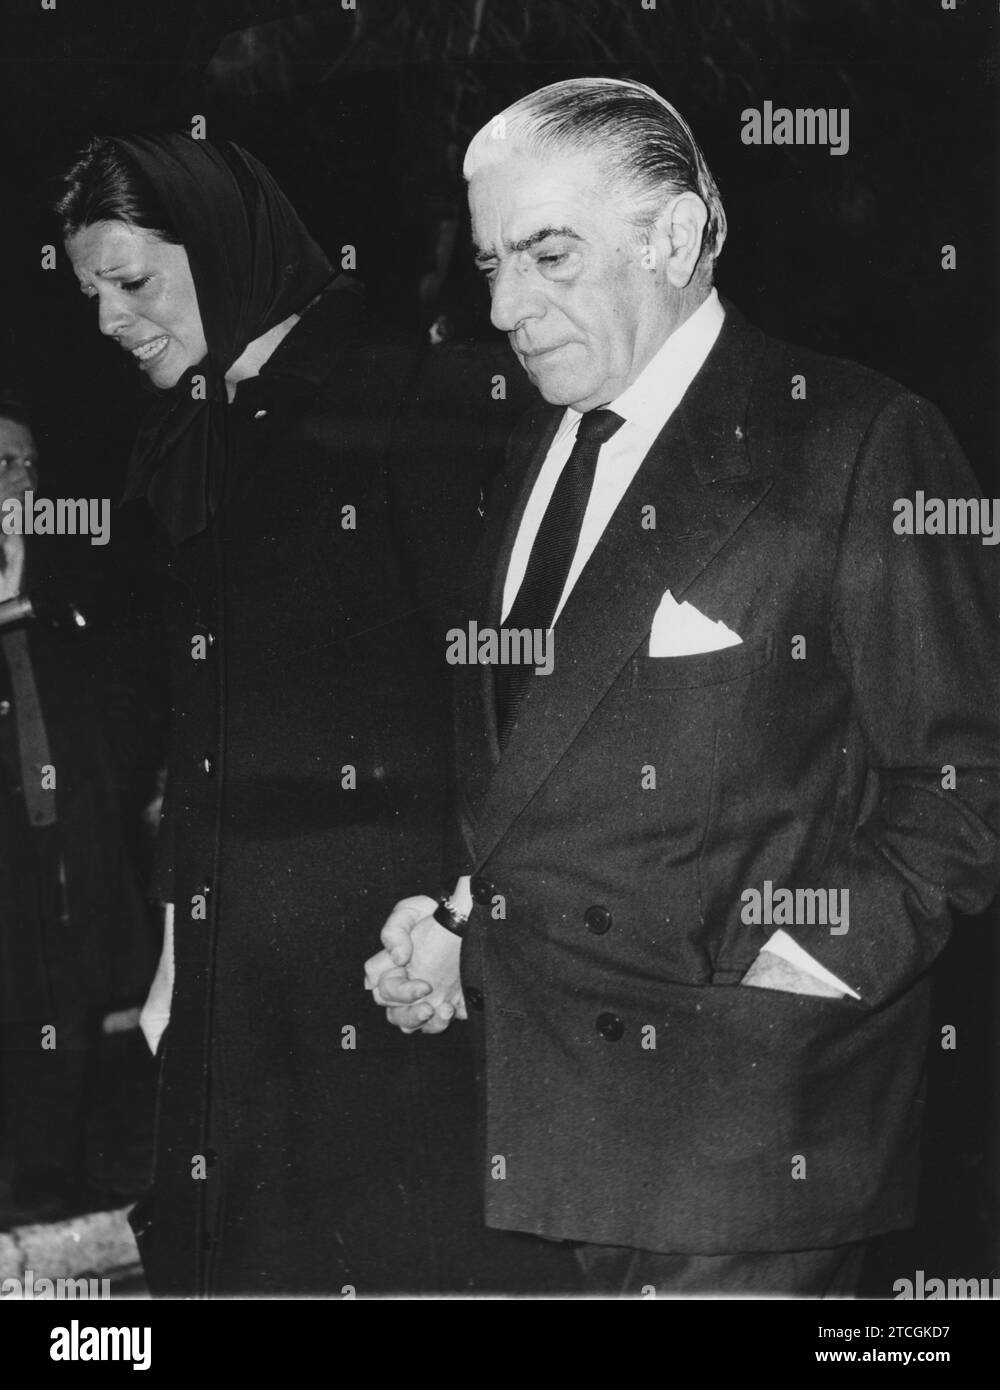 12/31/1972. Funerals for Alejandro Onassis: In the image Aristotle Onassis with his daughter Cristina. Credit: Album / Archivo ABC / Torremocha Stock Photo